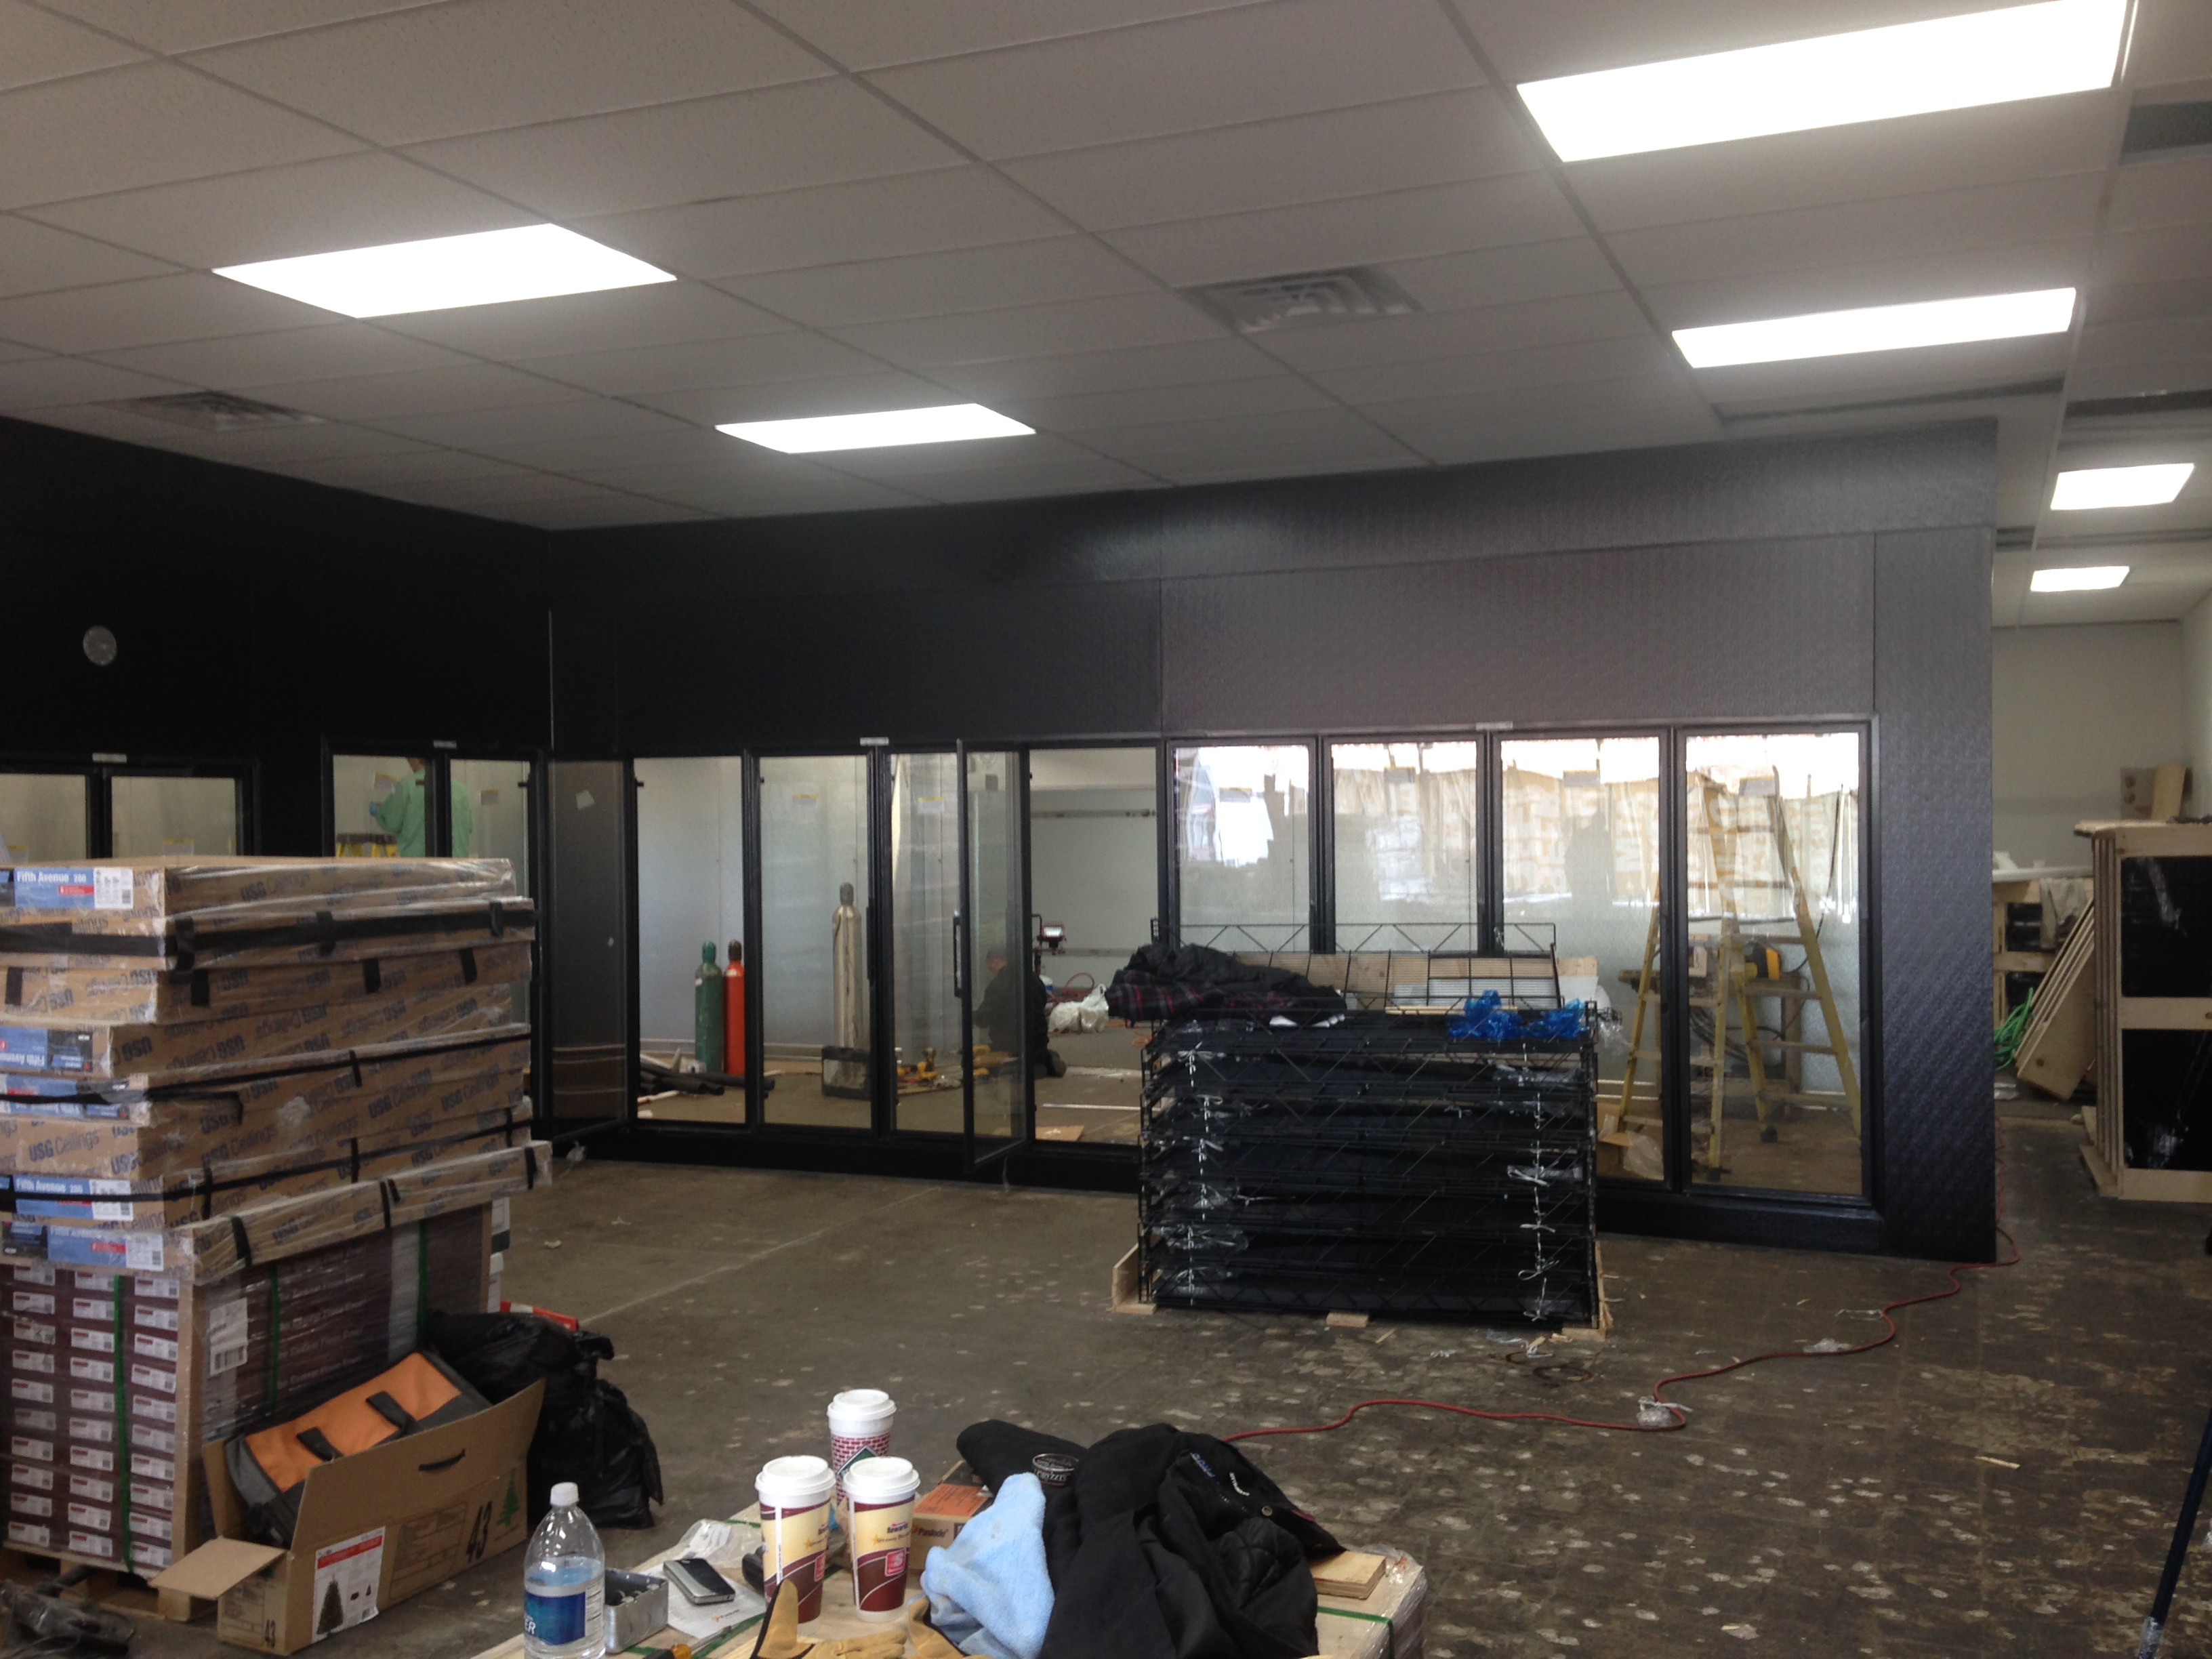 Install of retail coolers